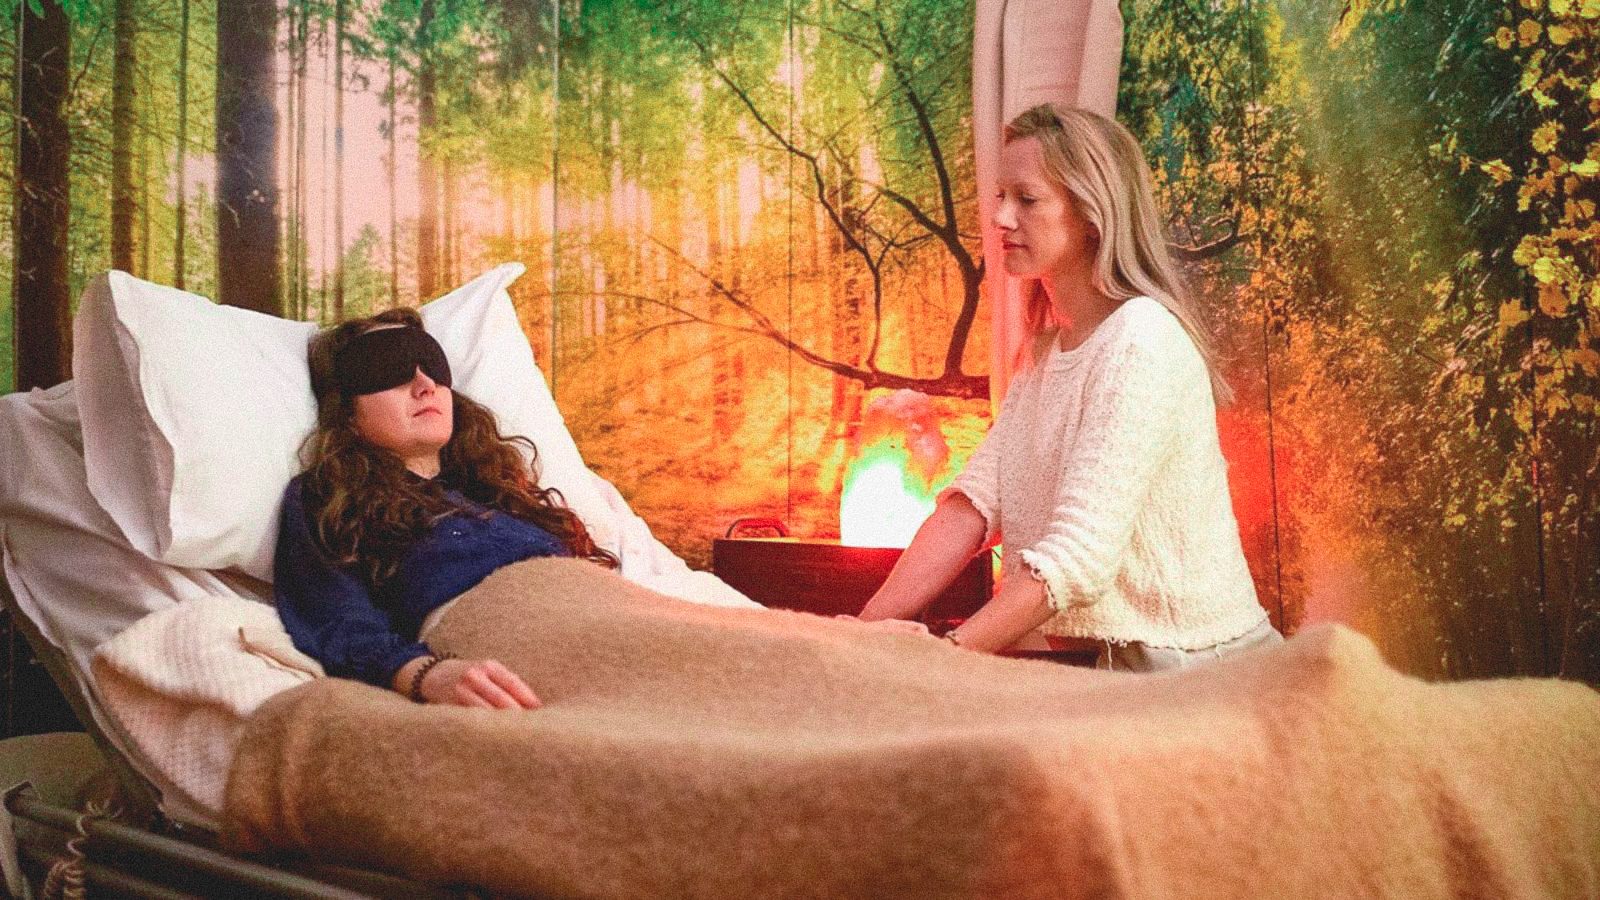 A photograph depicting a scene from the documentary, The Psychedelic Drug Trial, of a therapist assisting a woman through a psilocybin journey.